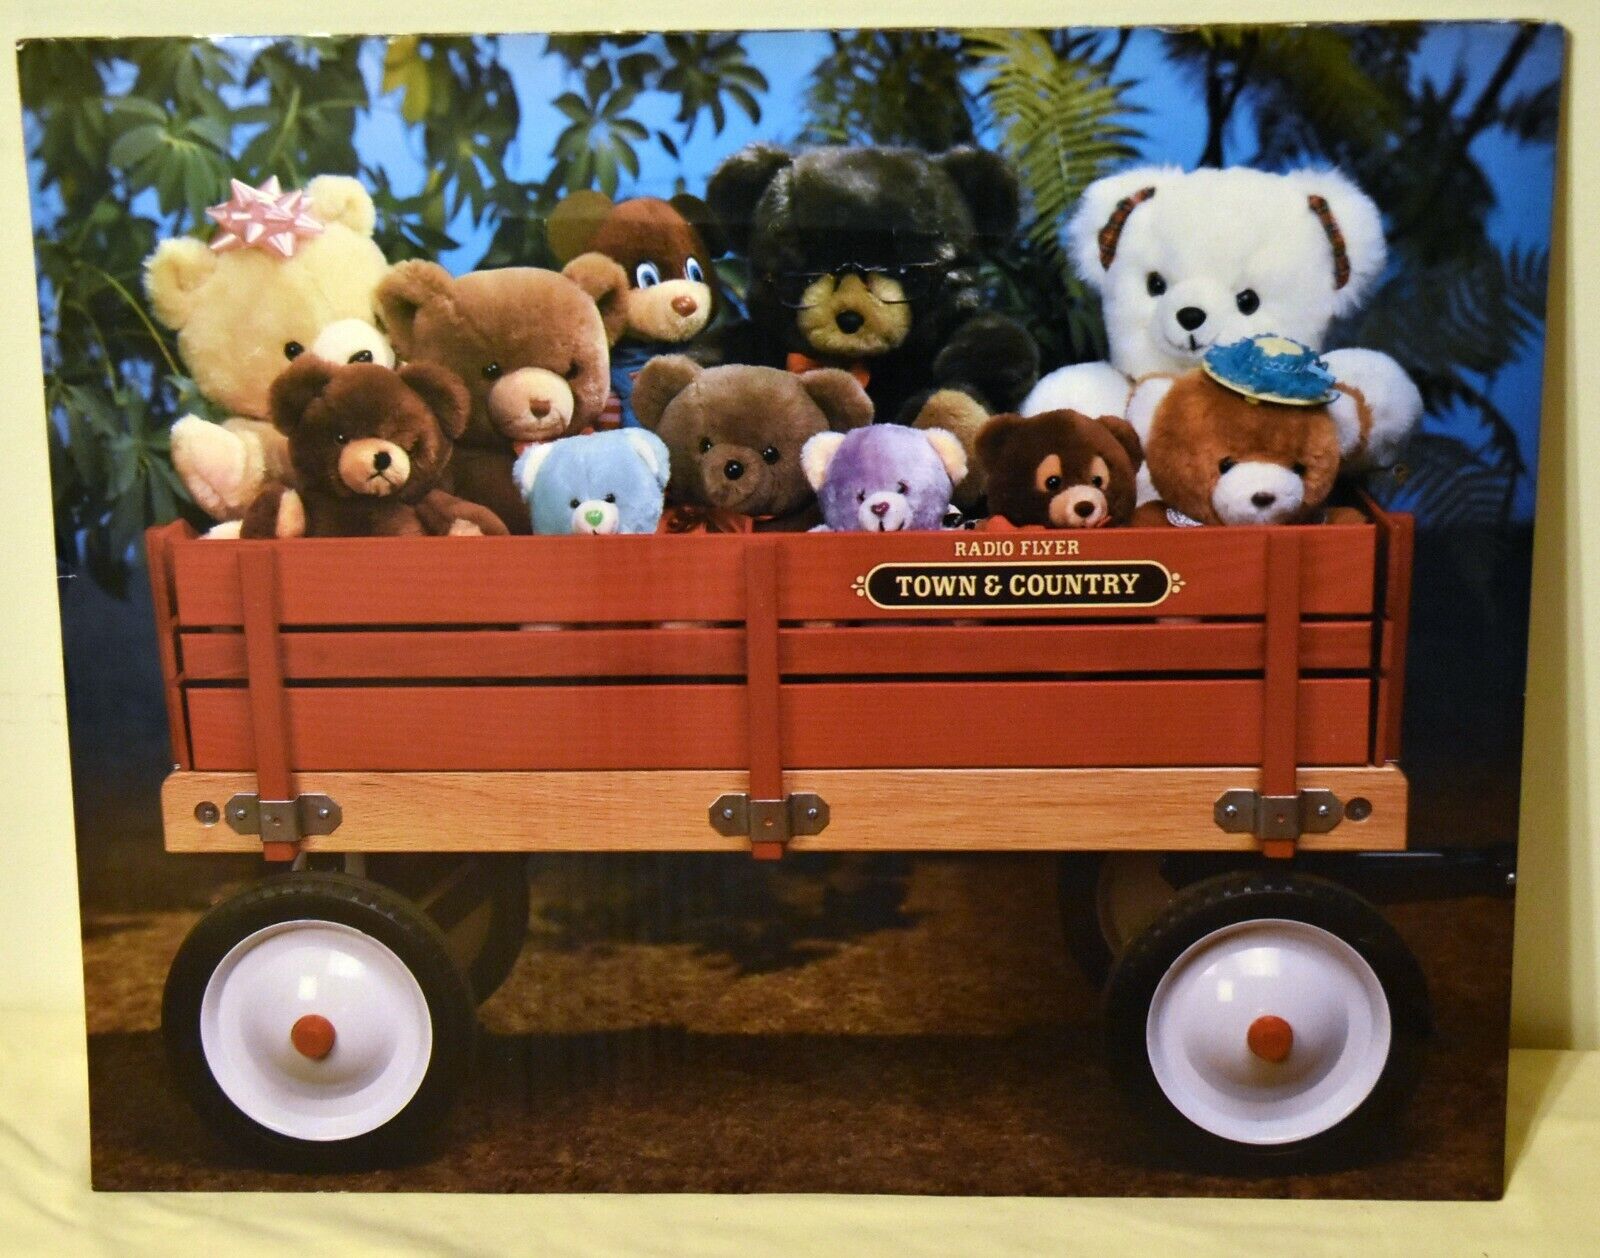 Radio Flyer Town & Country Wagon 16x20 Teddy Bears Poster